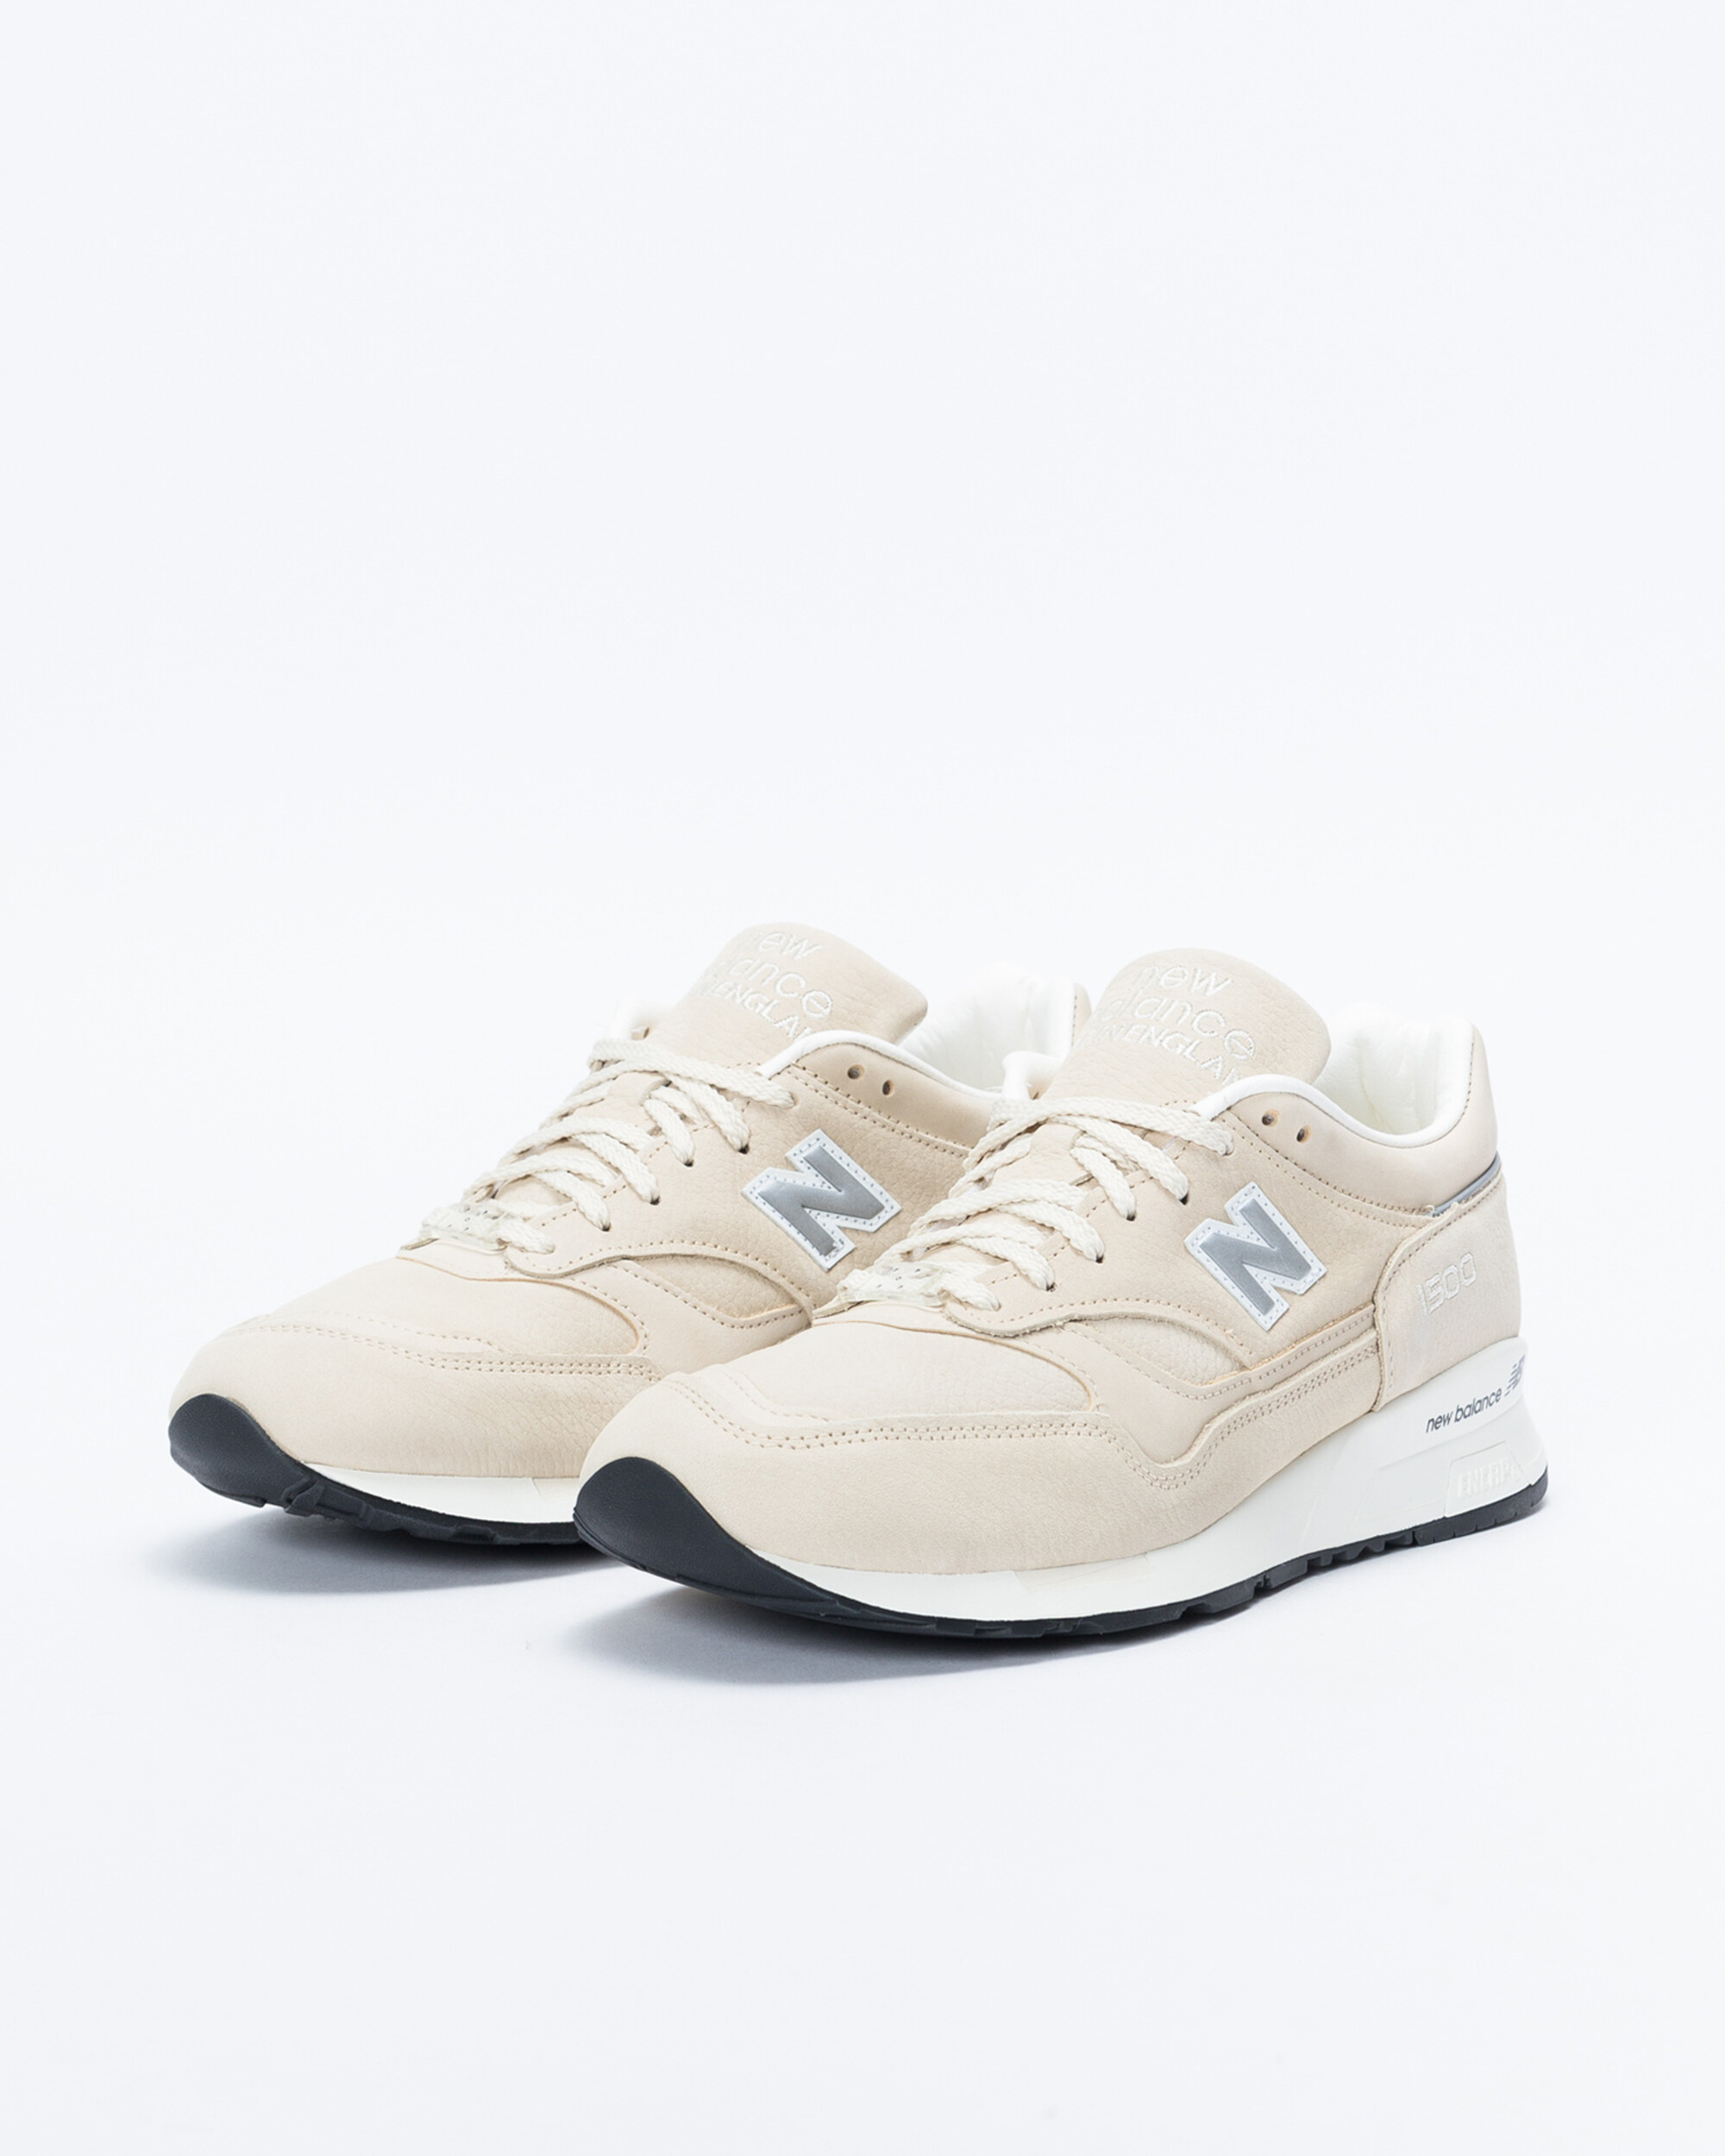 New Balance x Pop Trading Co M1500 Offwhite